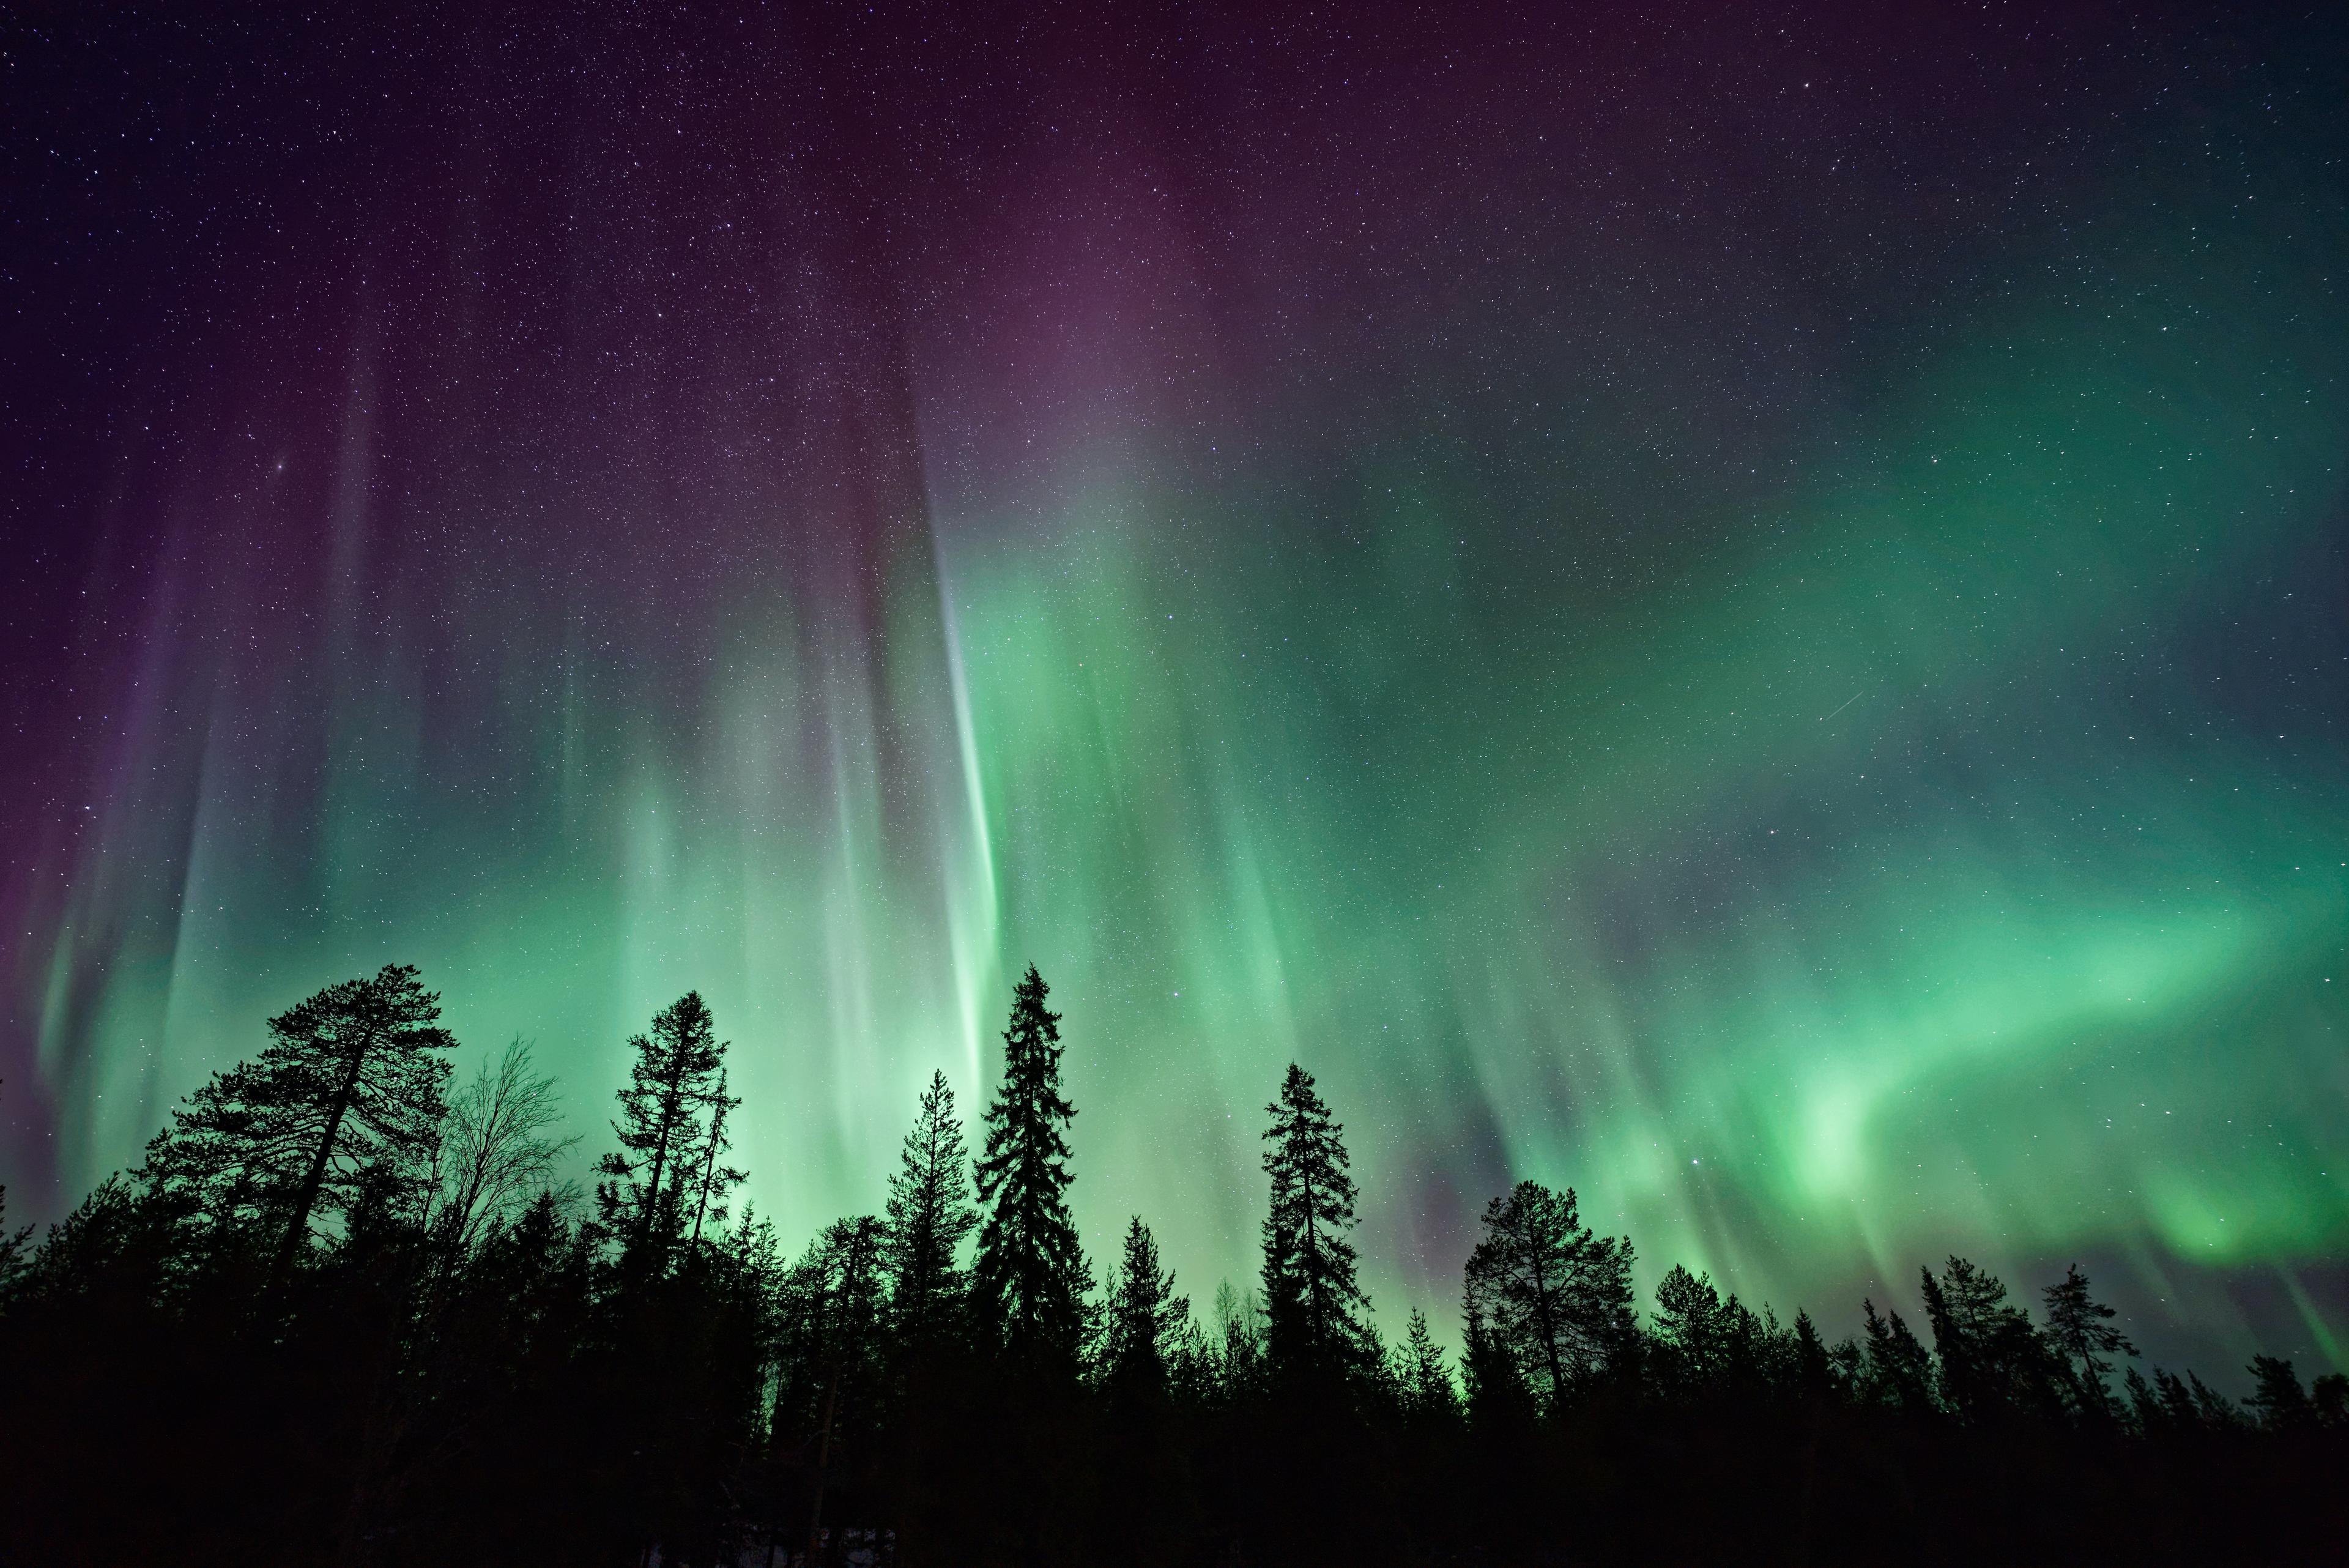 Vibrant Northern Lights (Aurora Borealis) streaming over a forested landscape at night.